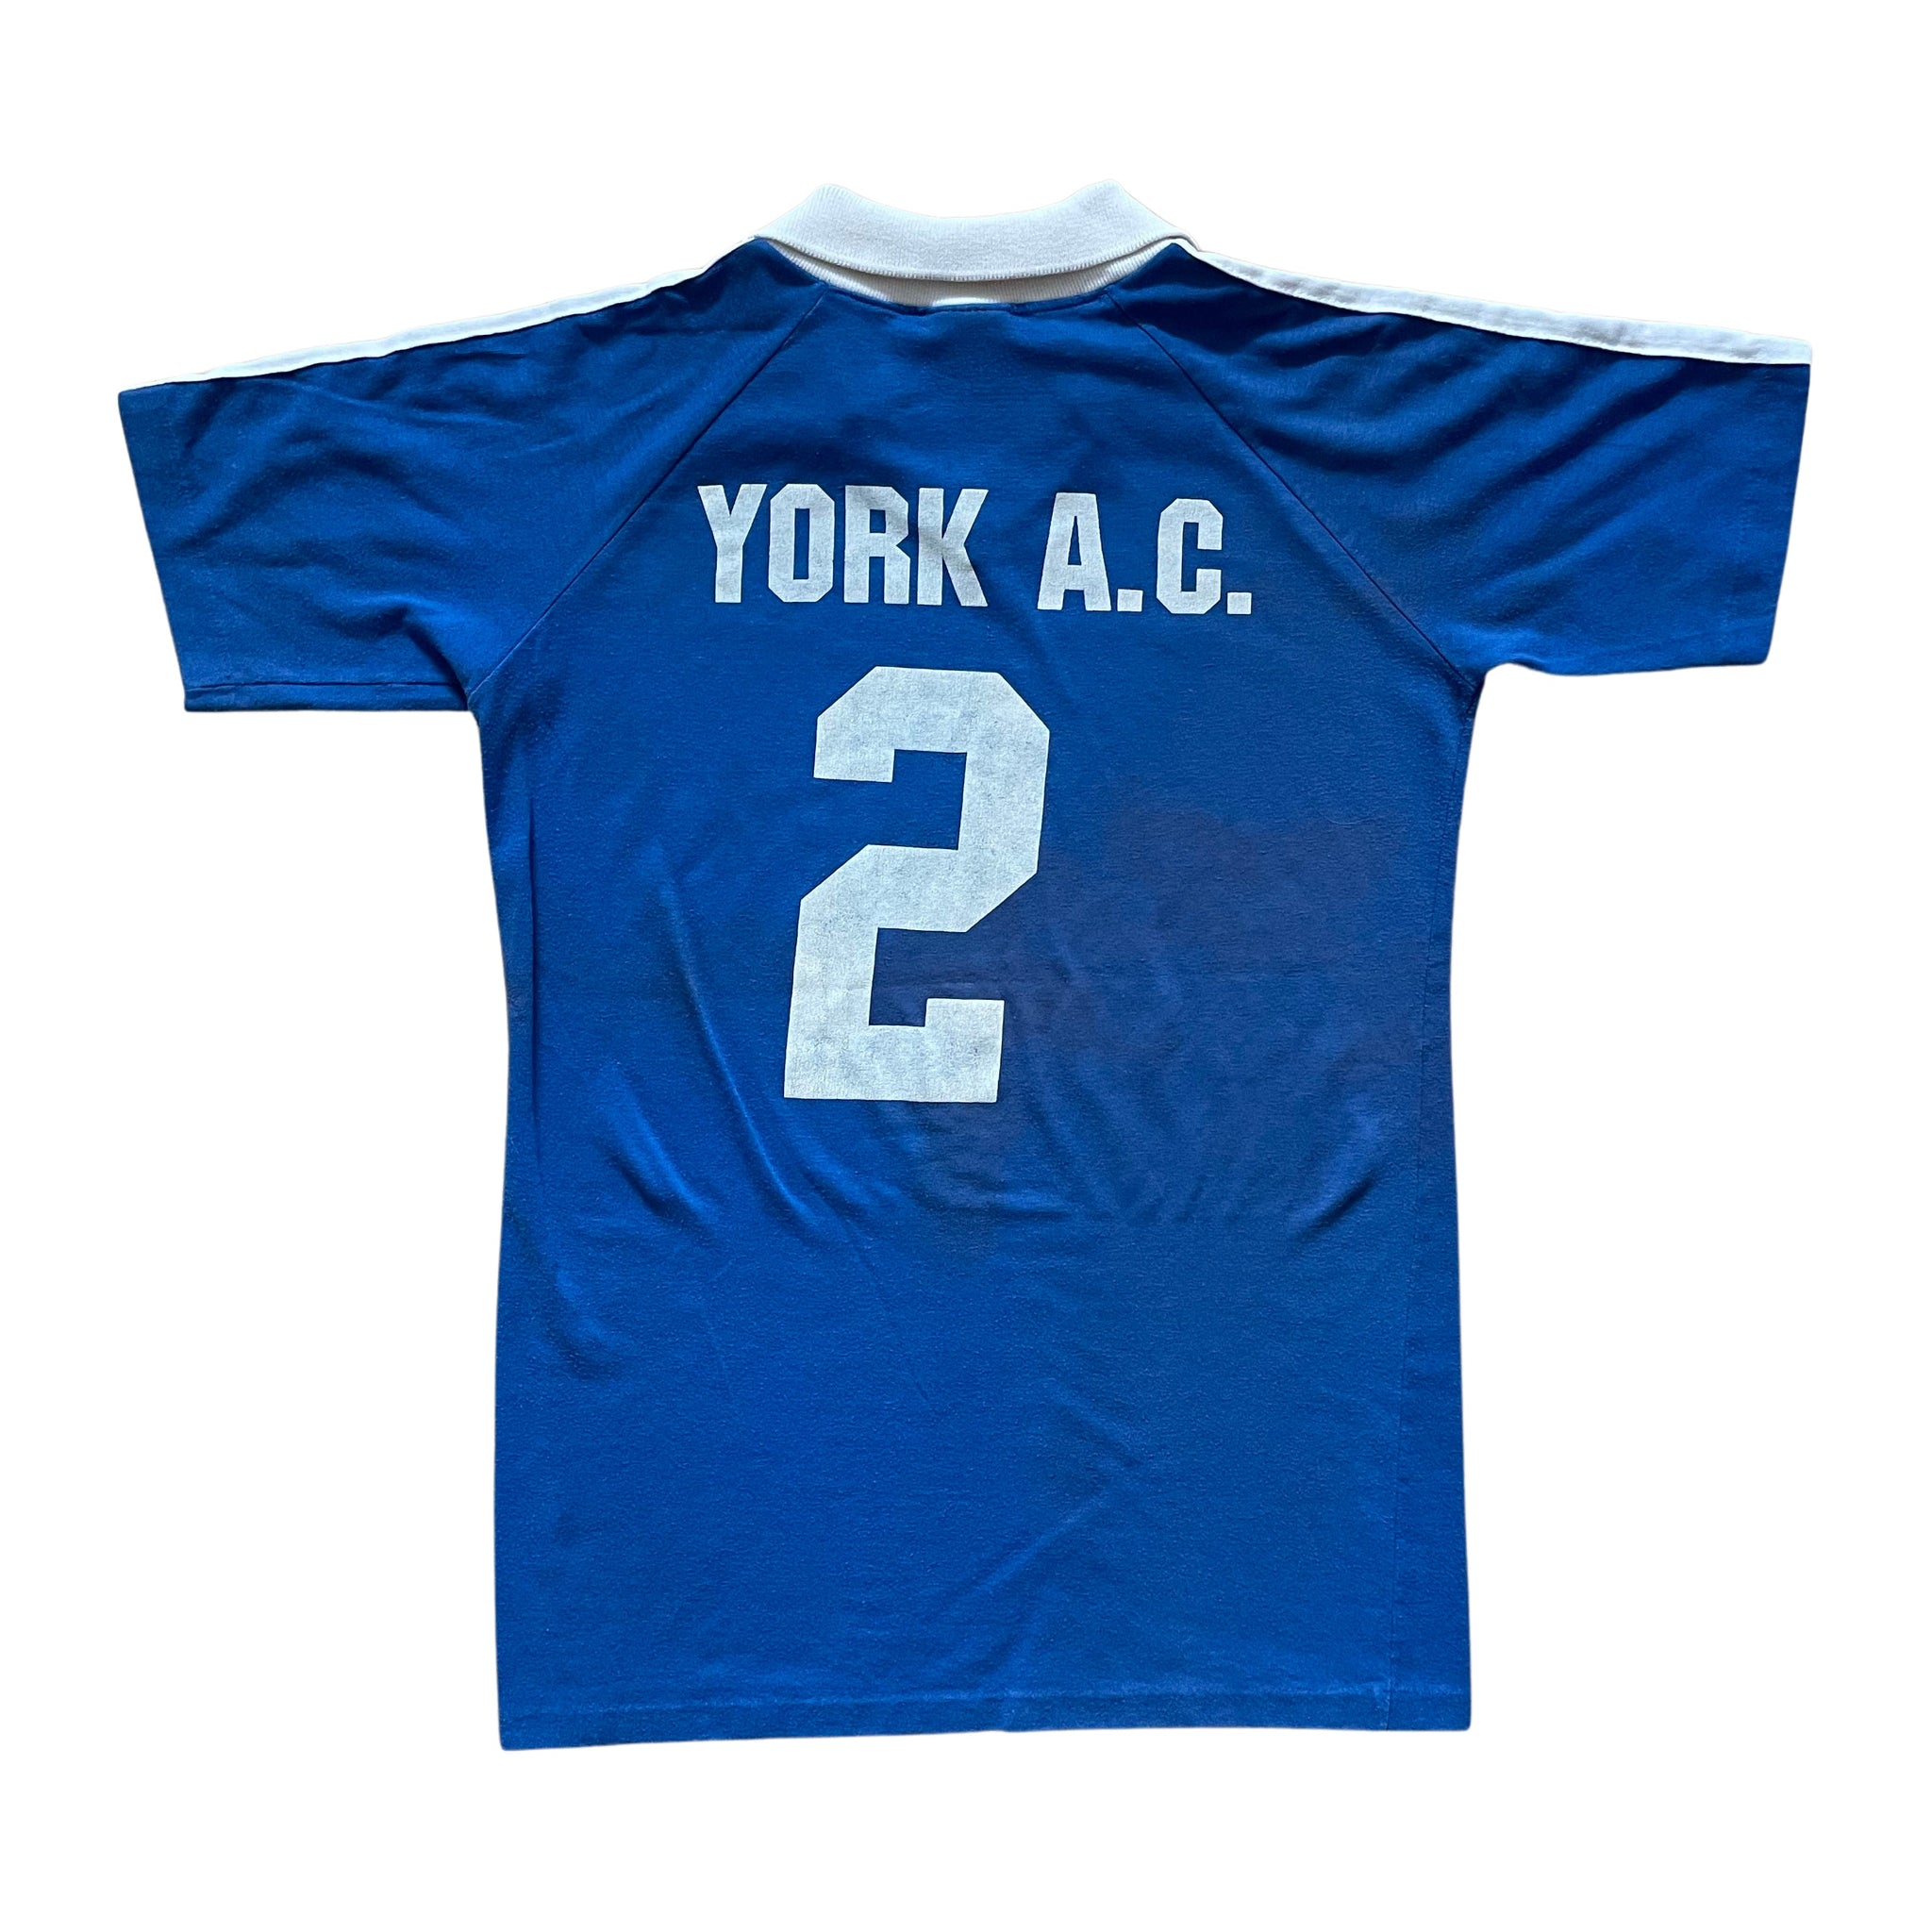 Nike Rangers York A.C. Collared Jersey - XS/S